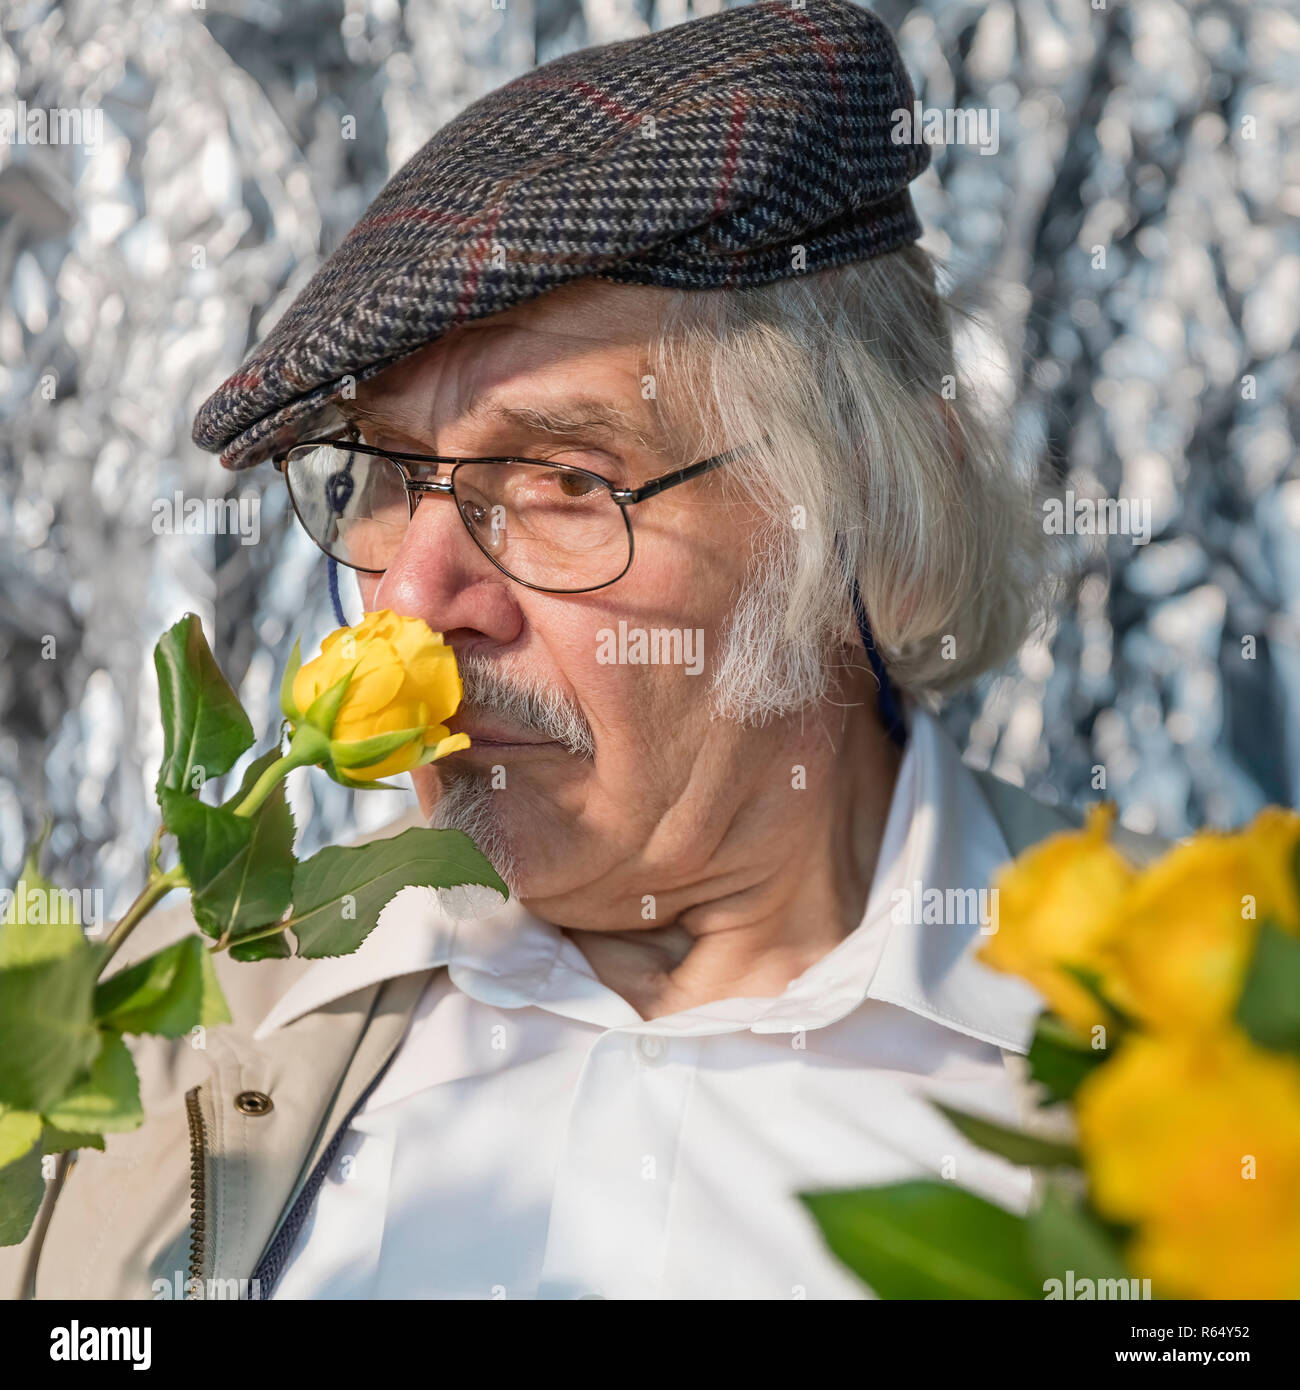 happy pensioner smells a yellow rose Stock Photo